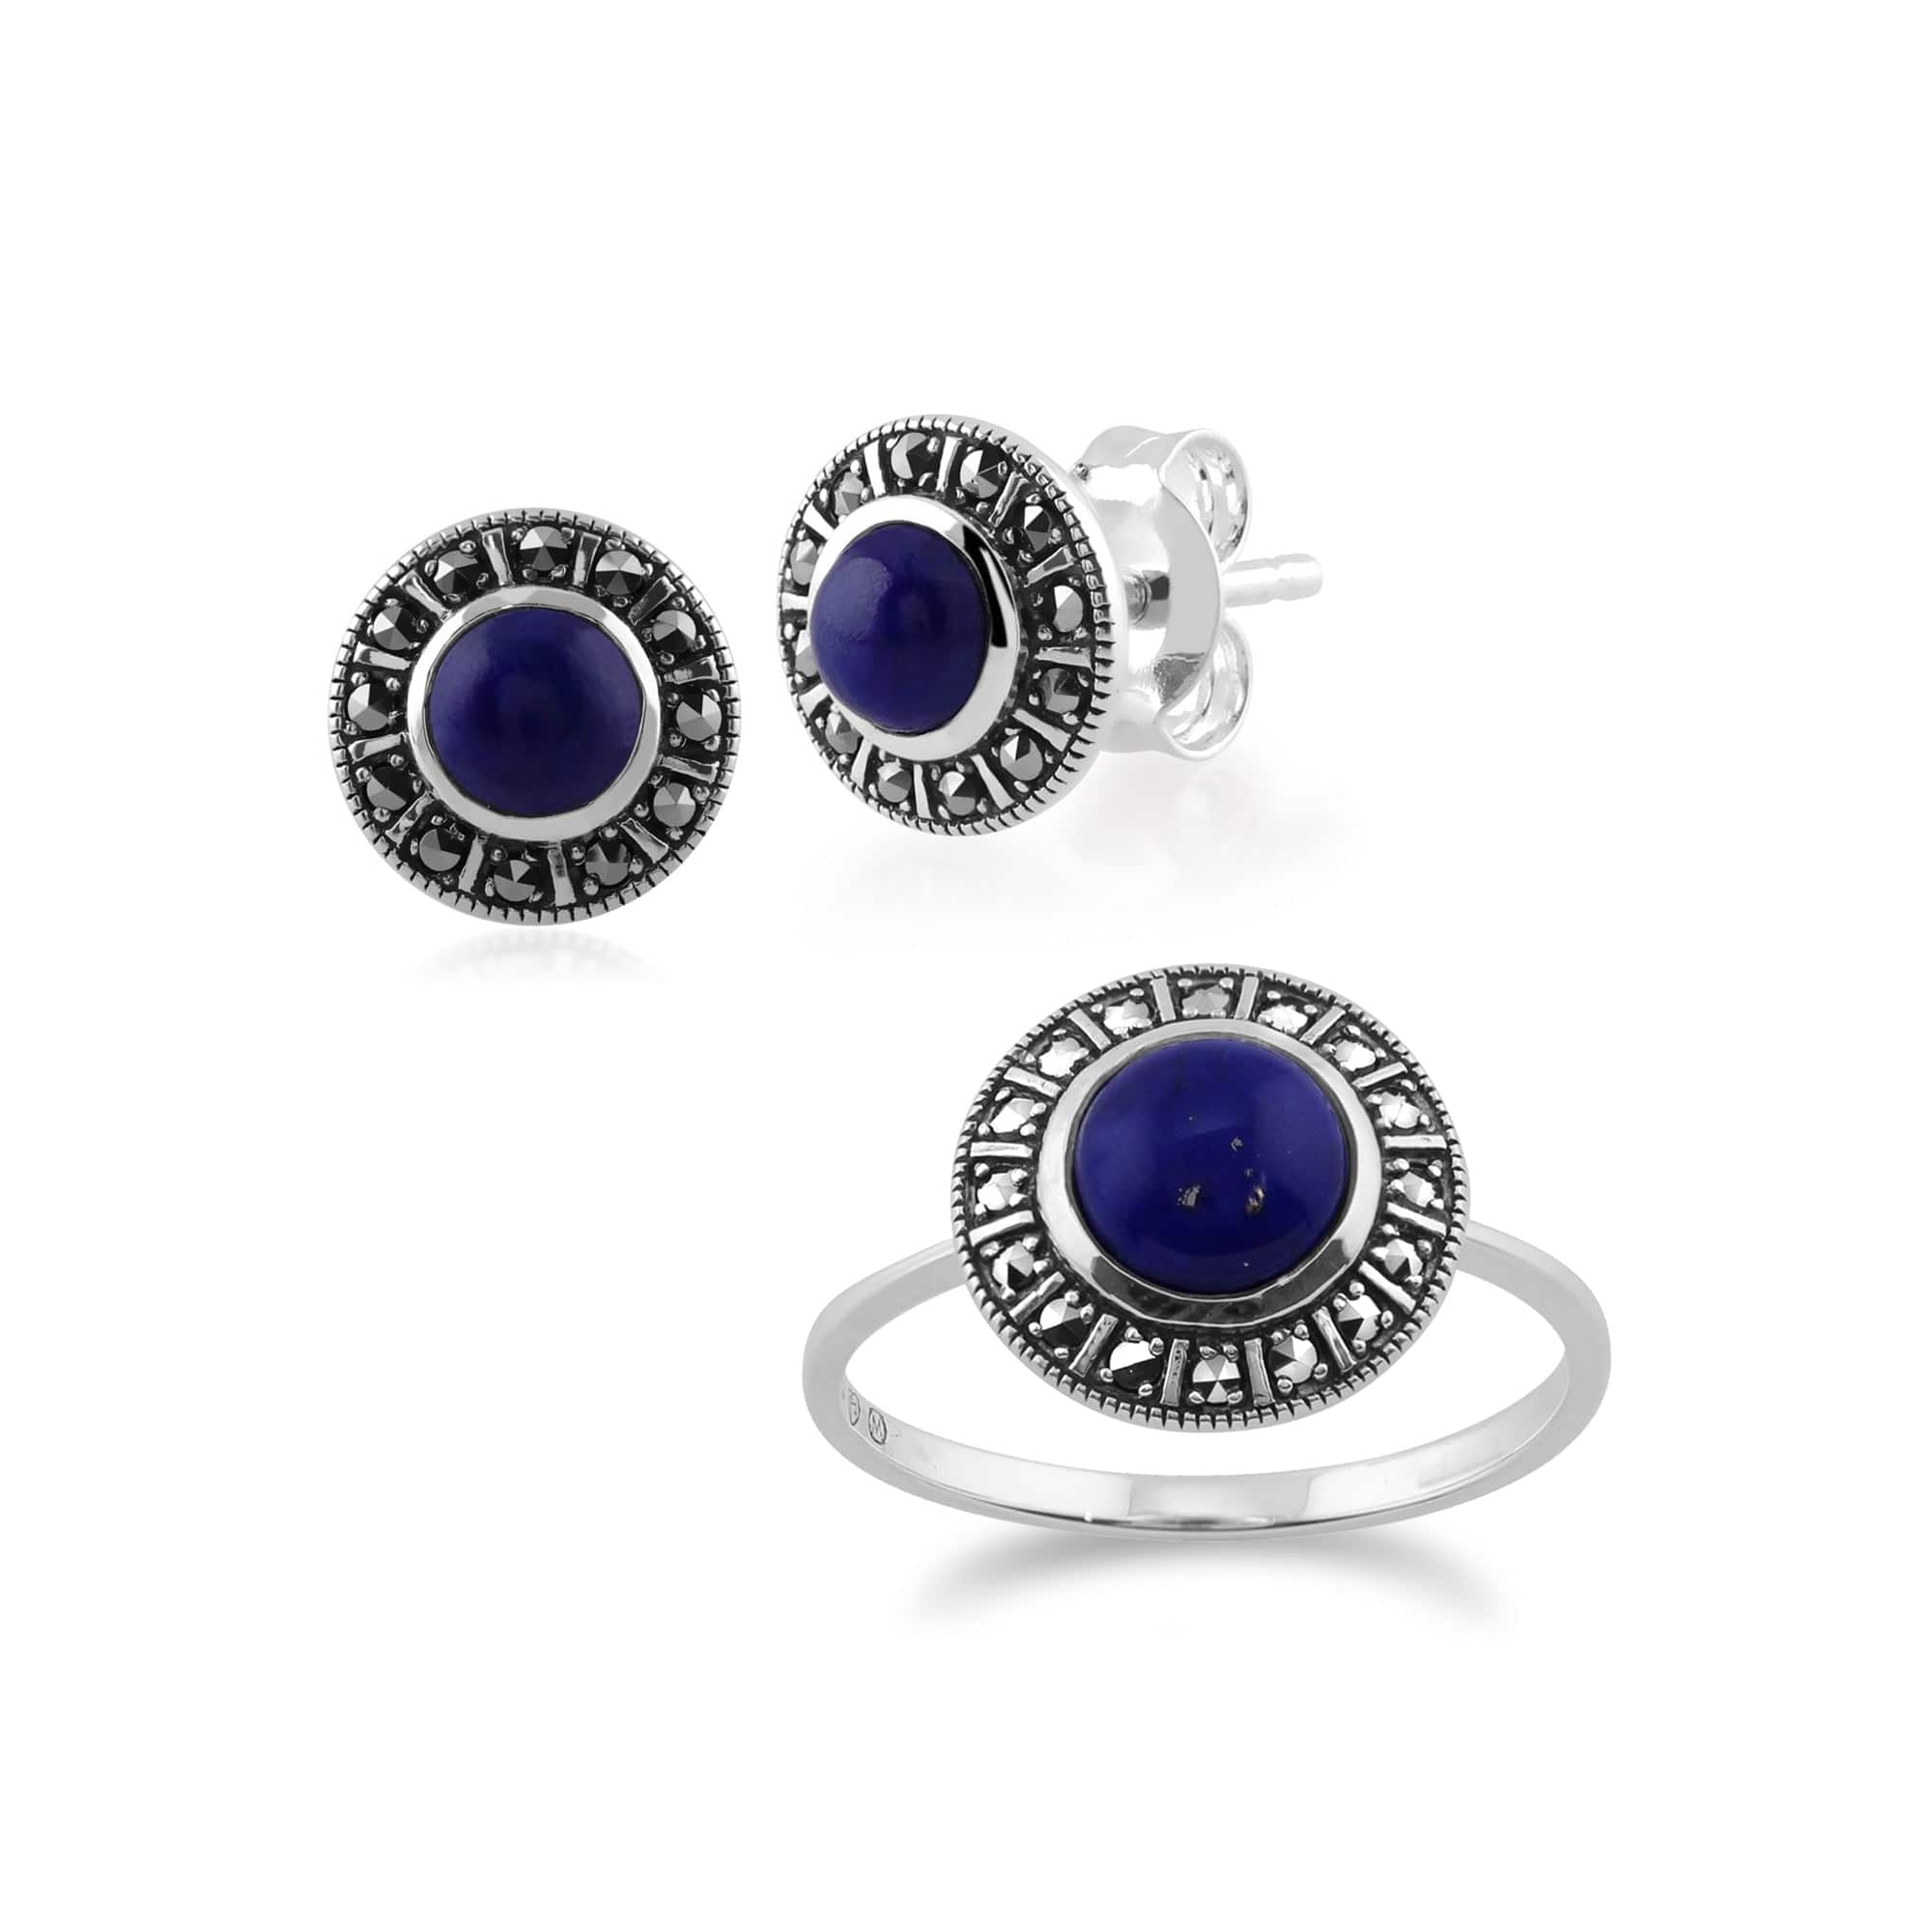 Art Deco Style Round Lapis Lazuli & Marcasite Halo Stud Earrings & Ring Set in 925 Sterling Silver - Gemondo